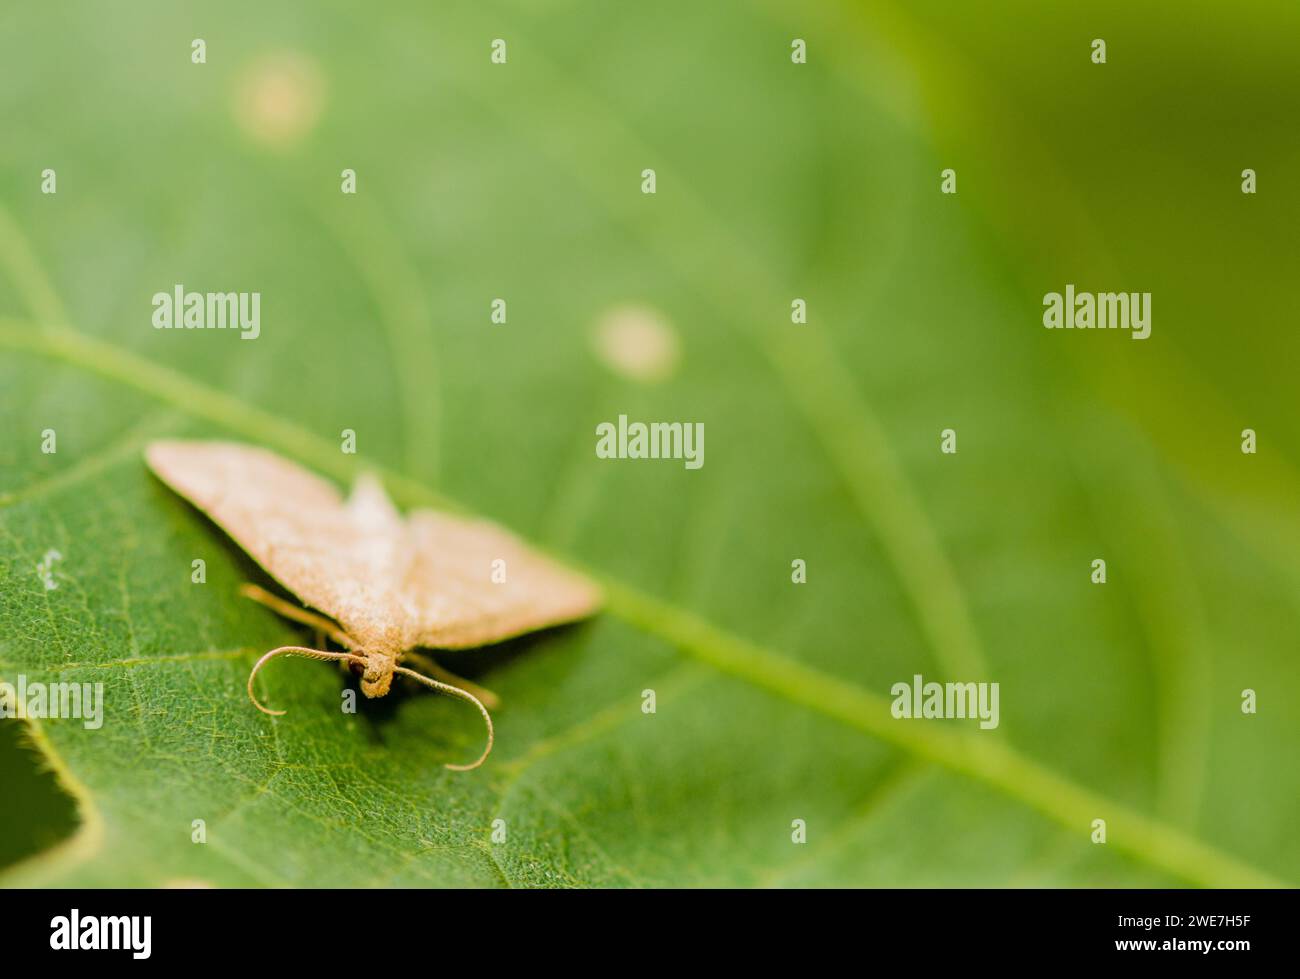 Small moth with handlebar mustache shaped antenna sitting on broad green leaf. Selective focus on facial area Stock Photo